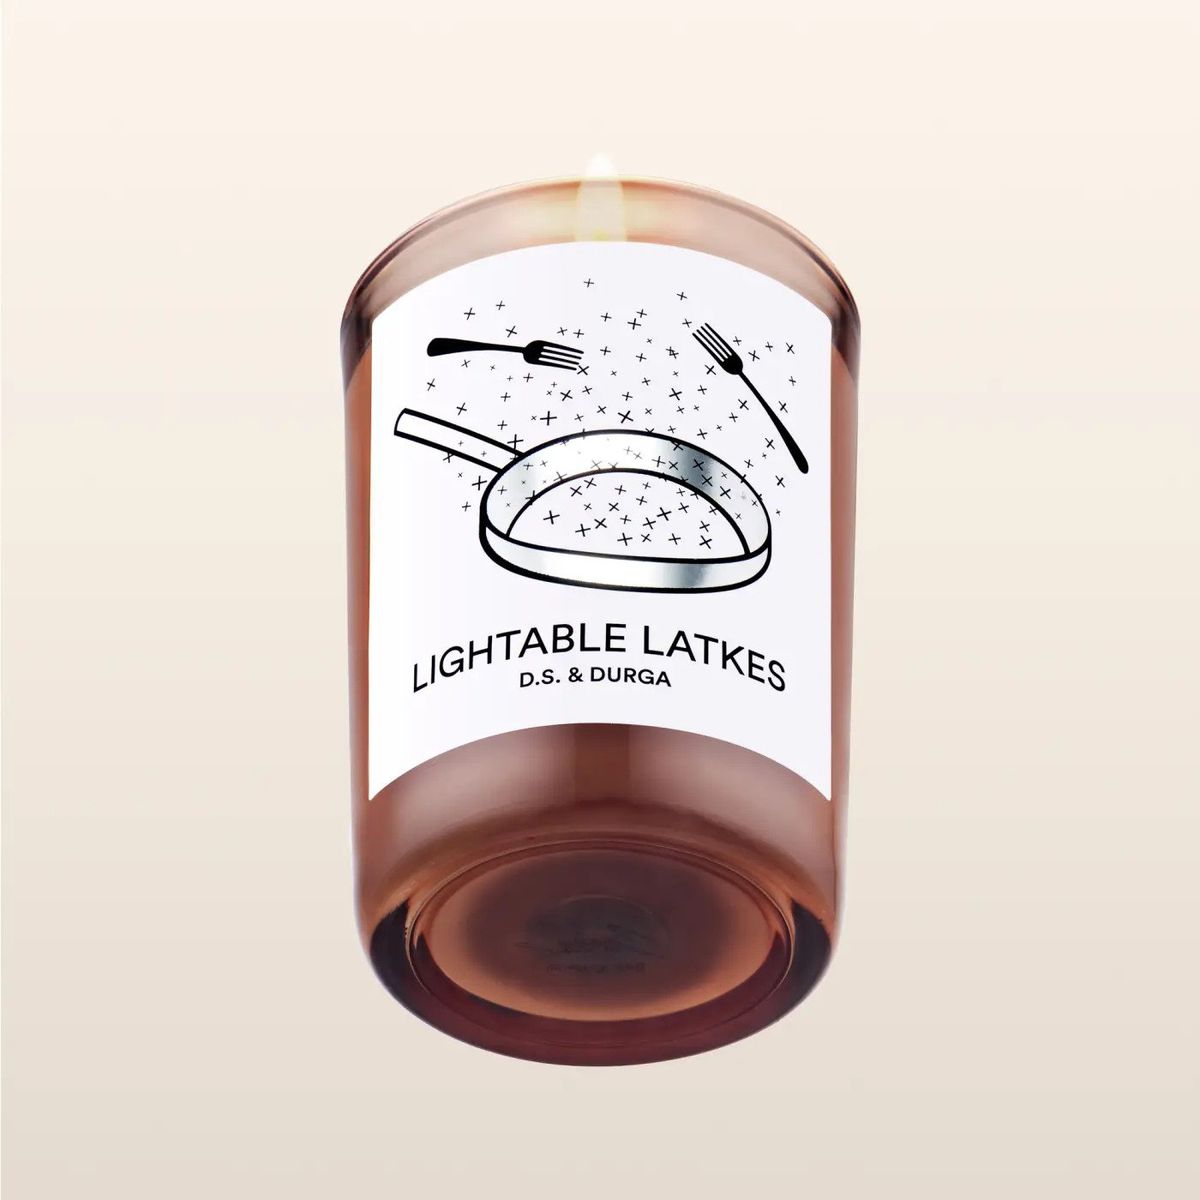 A candle with a label that reads LIGHTABLE LATKES